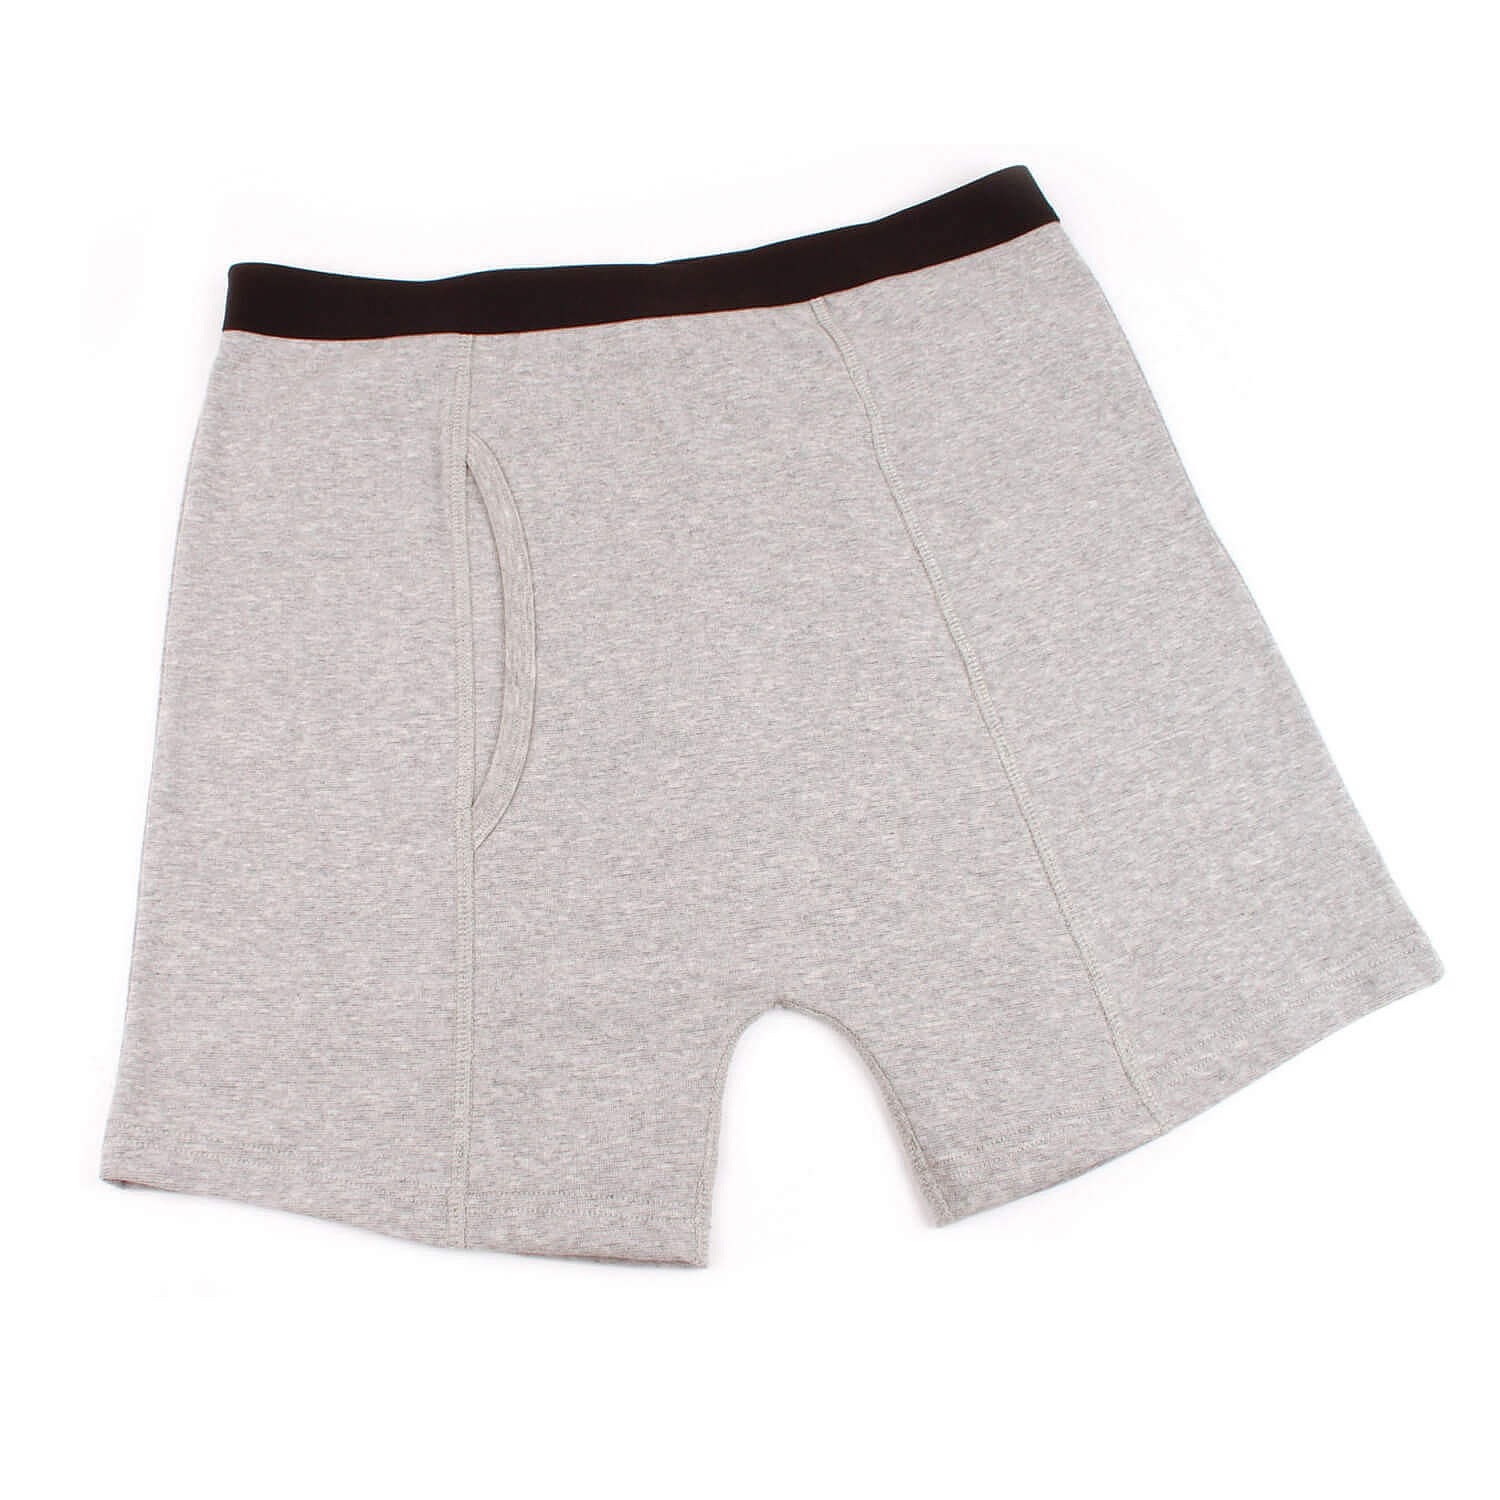 3 Pk Stay Dry Mens Boxer Shorts: look like ordinary boxers.